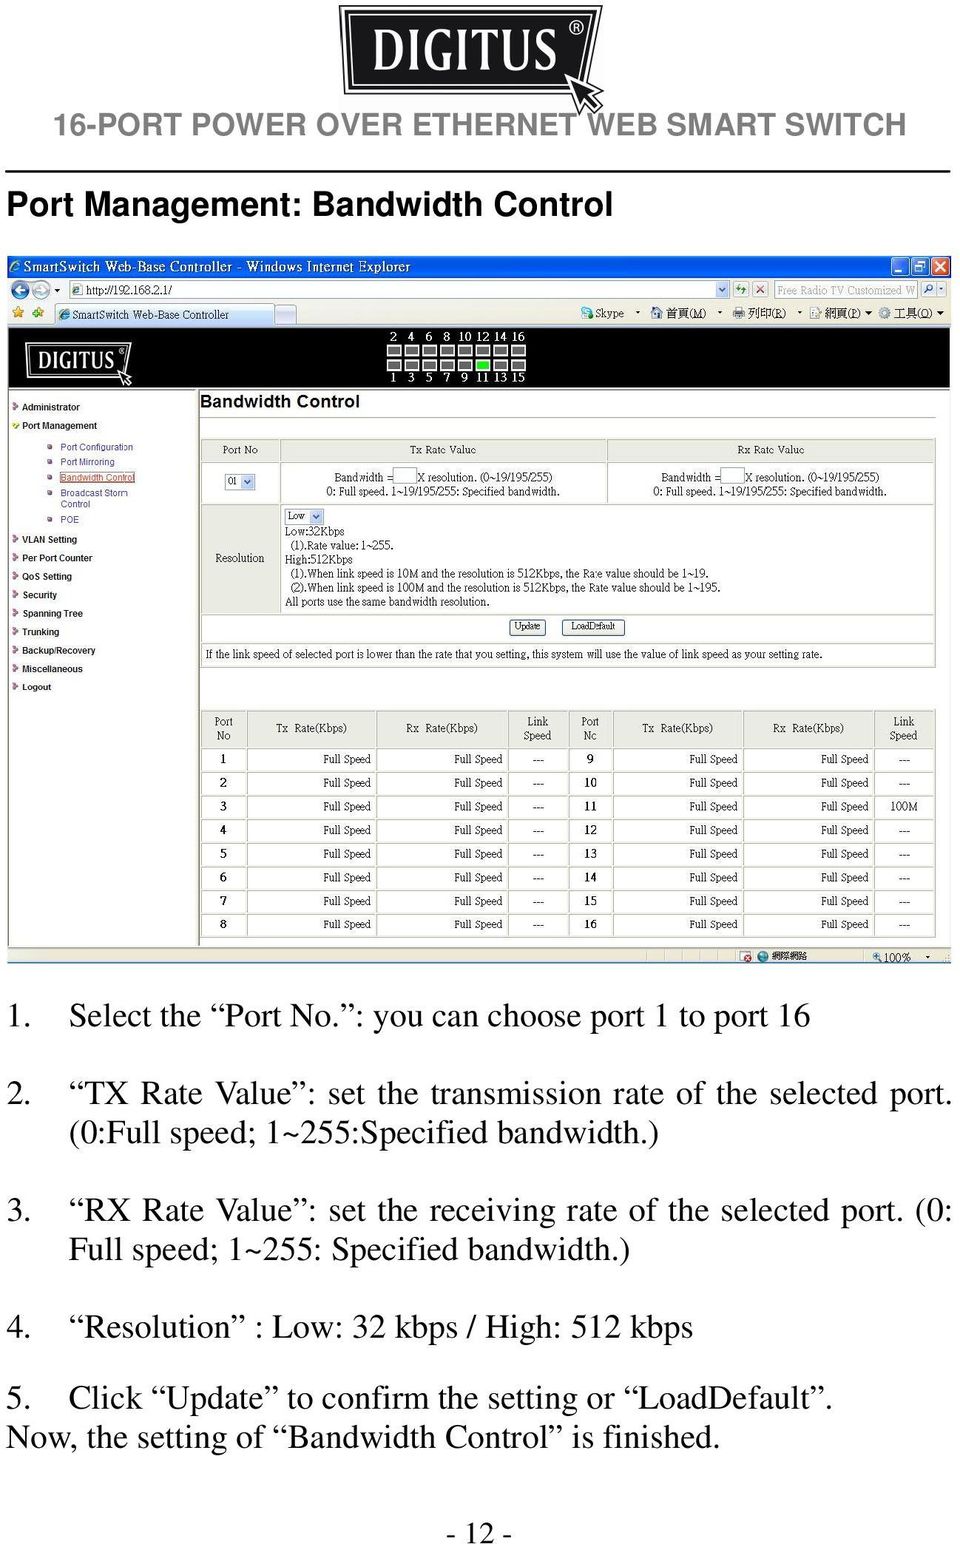 RX Rate Value : set the receiving rate of the selected port. (0: Full speed; 1~255: Specified bandwidth.) 4.